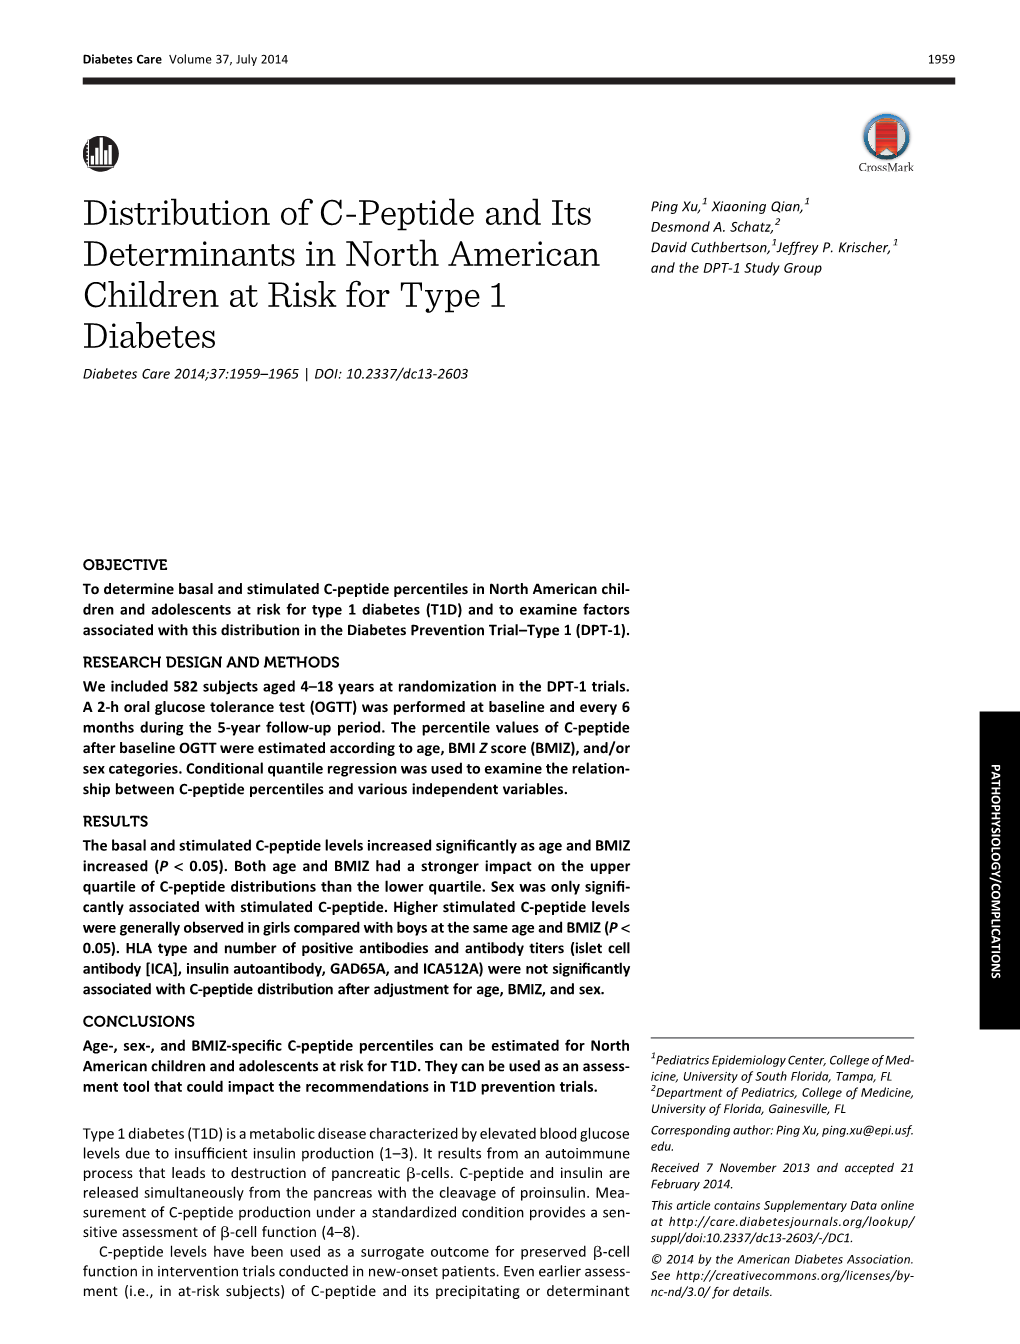 Distribution of C-Peptide and Its Determinants in North American